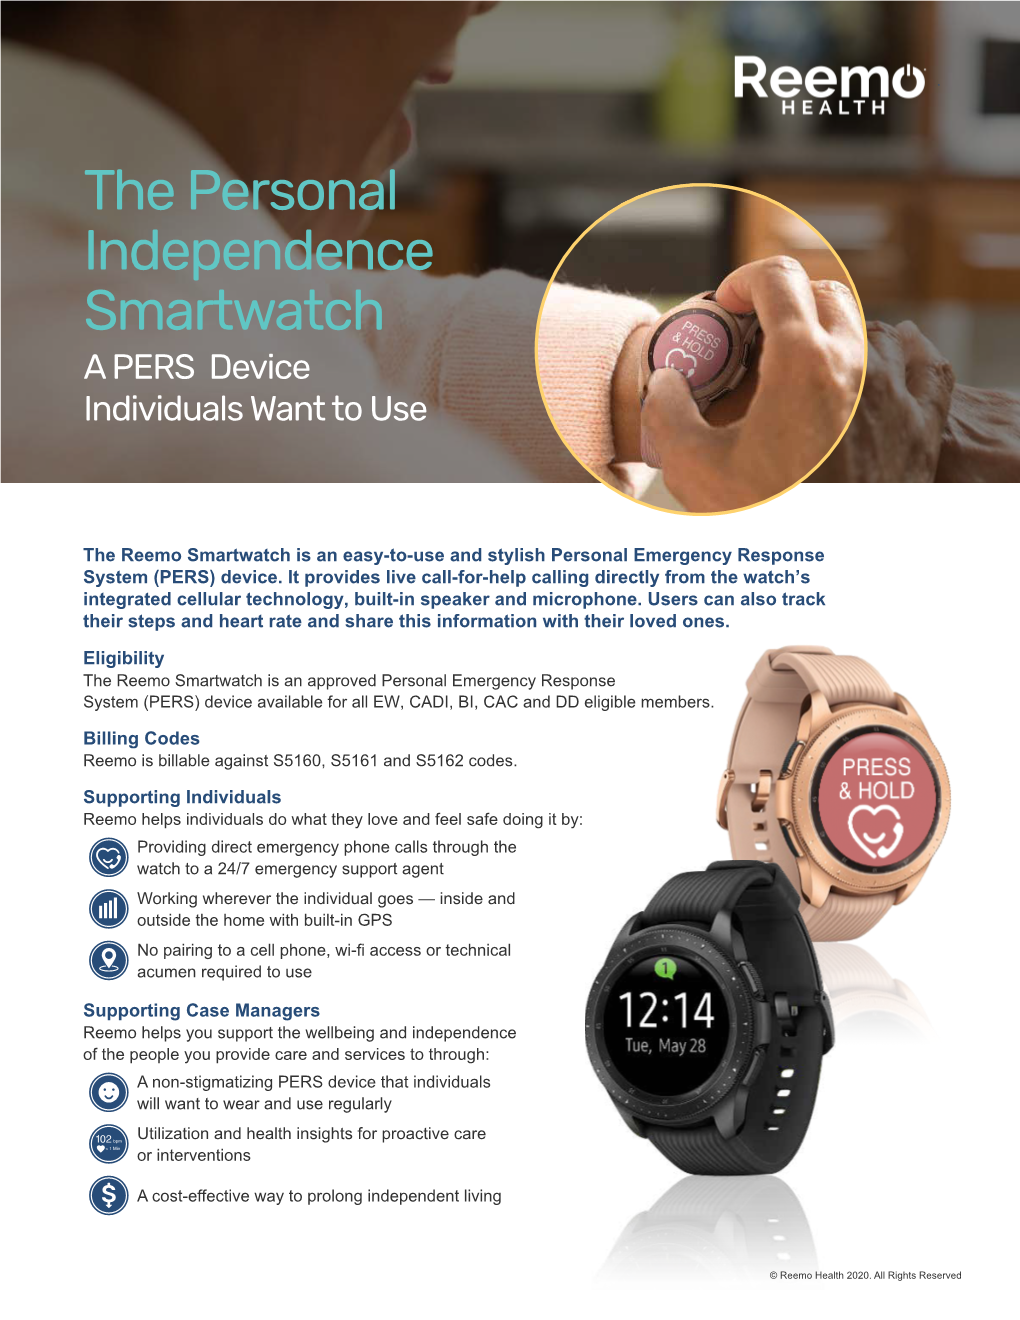 The Personal Independence Smartwatch a PERS Device Individuals Want to Use